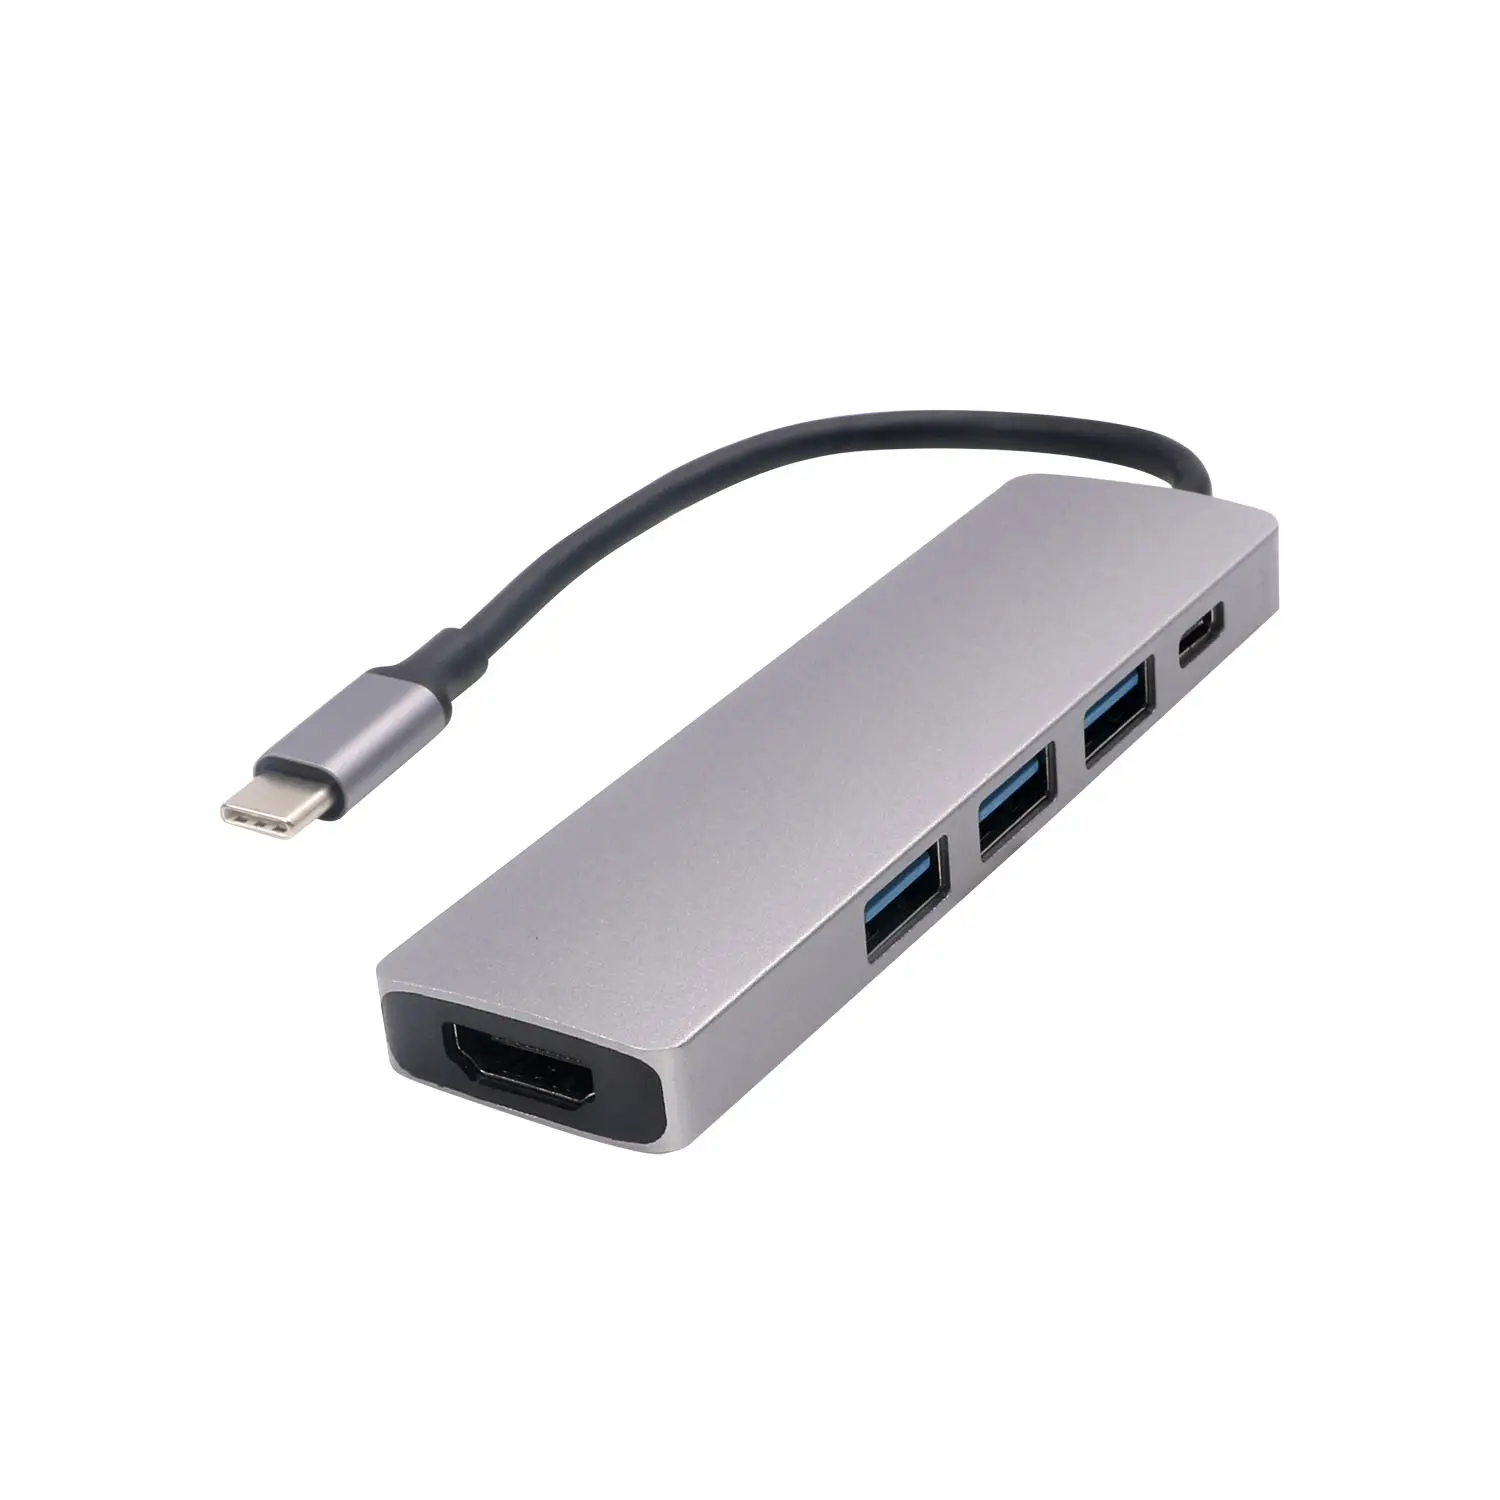 5 in1 USB 3.1 Type-C Hub To HD Adapter 4K Thunderbolt 3 USB C Hub with 3*USB 3.0 port PD charging for Macbook pro laptops